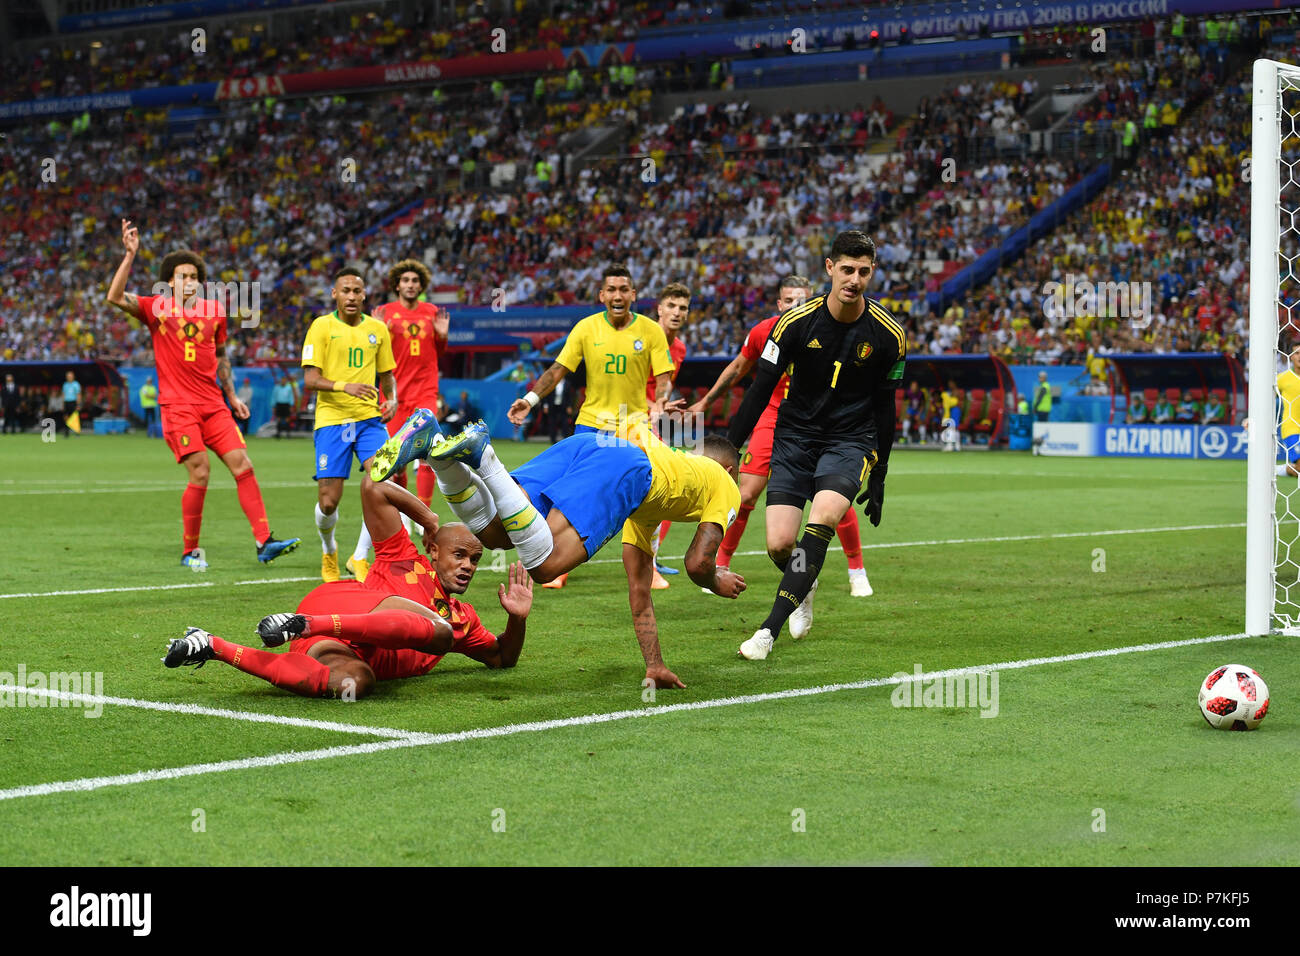 Kazan, Russia. 6th July 2018. Kazan, Russland. 06th July, 2018. Penalty scene-GABRIEL JESUS (BRA) falls over Vincent KOMPANY (BEL), action, duels, re: Thibaut COURTOIS, goalkeeper (BEL). Brazil (BRA) - Belgium (BEL) 1-2, Quarter-Finals, Round of Eight, Game 58 on 06.07.2018 in Kazan, Kazan Arena. Football World Cup 2018 in Russia from 14.06. - 15.07.2018. | usage worldwide Credit: dpa/Alamy Live News Credit: dpa picture alliance/Alamy Live News Stock Photo